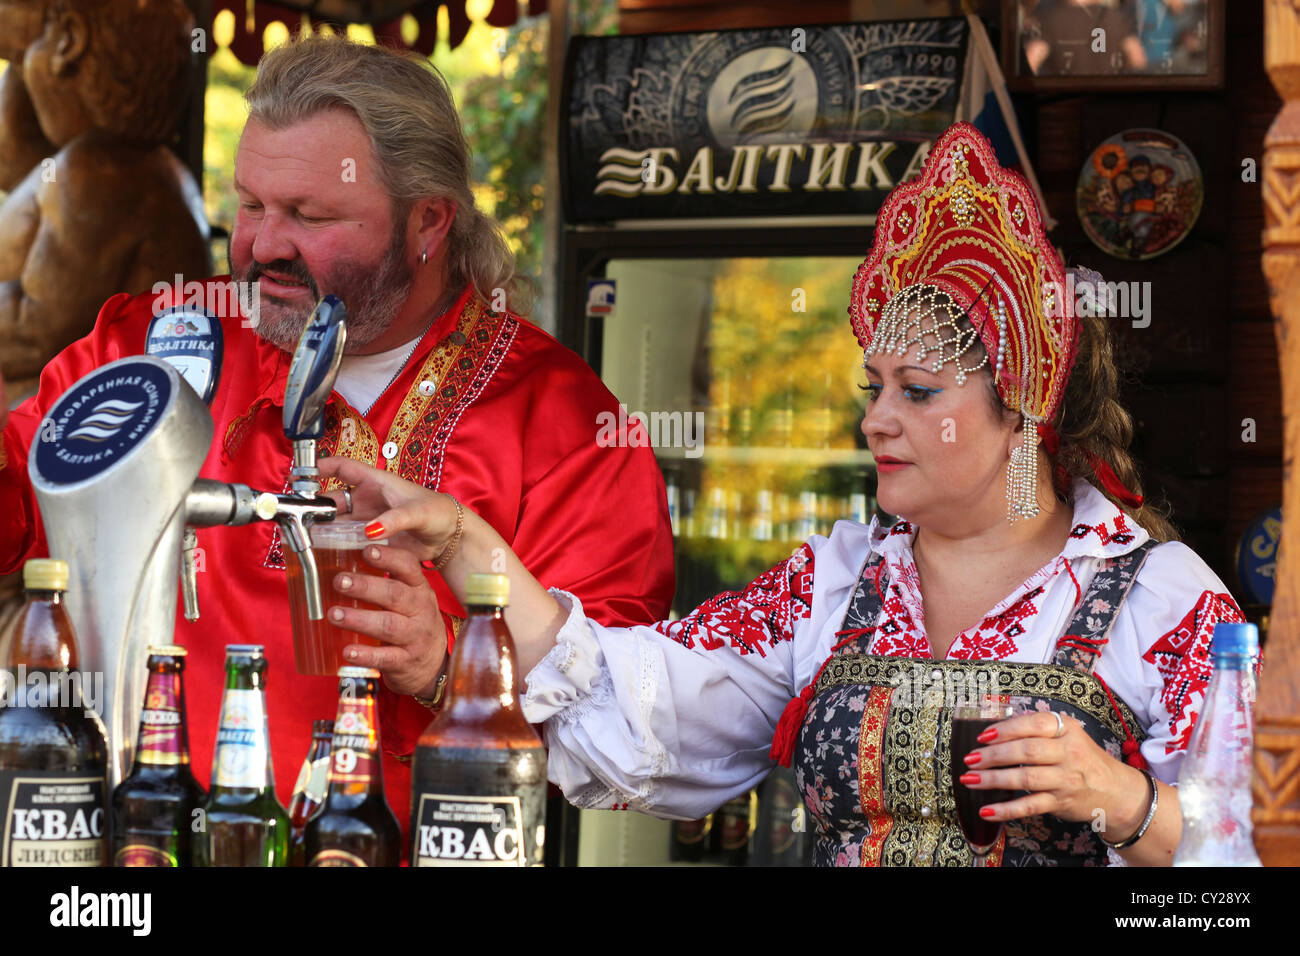 During a festival Ukrainian people in traditional costumes serving beer from Eastern Europe behind a beverage stand. Stock Photo